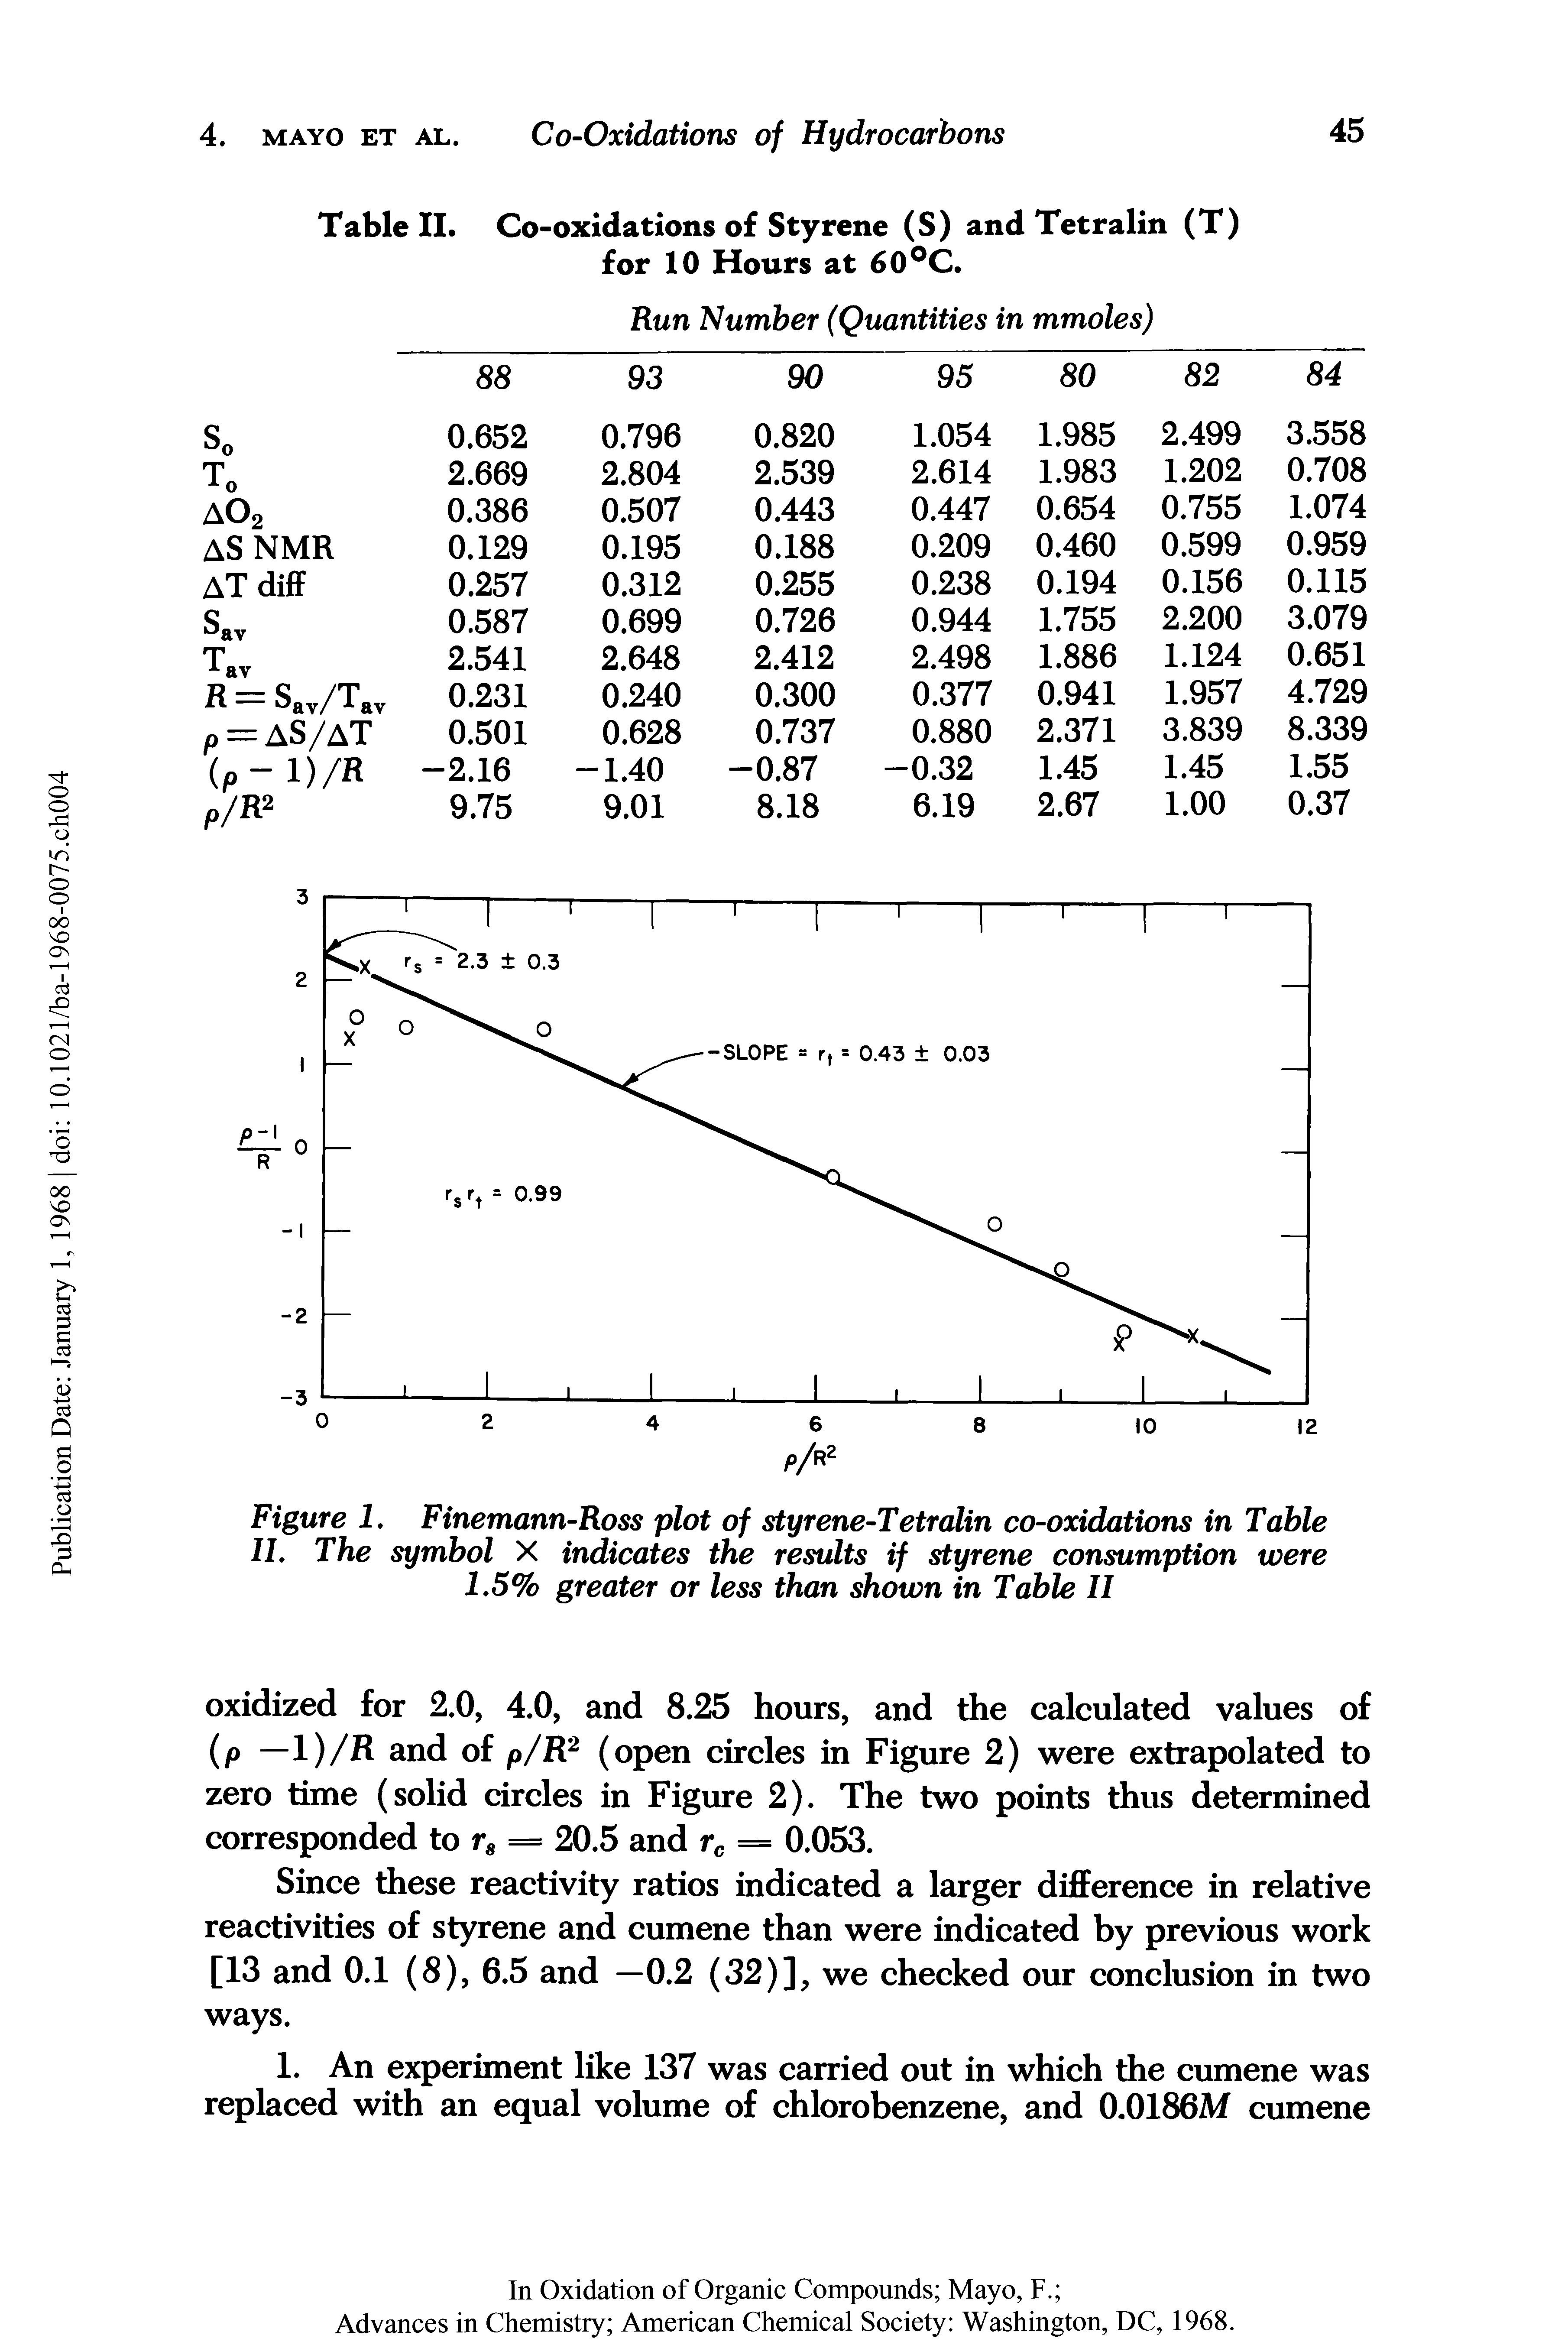 Figure I. Finemann-Ross plot of styrene-Tetralin co-oxidations in Table II. The symbol X indicates the results if styrene consumption were 1.5% greater or less than shown in Table II...